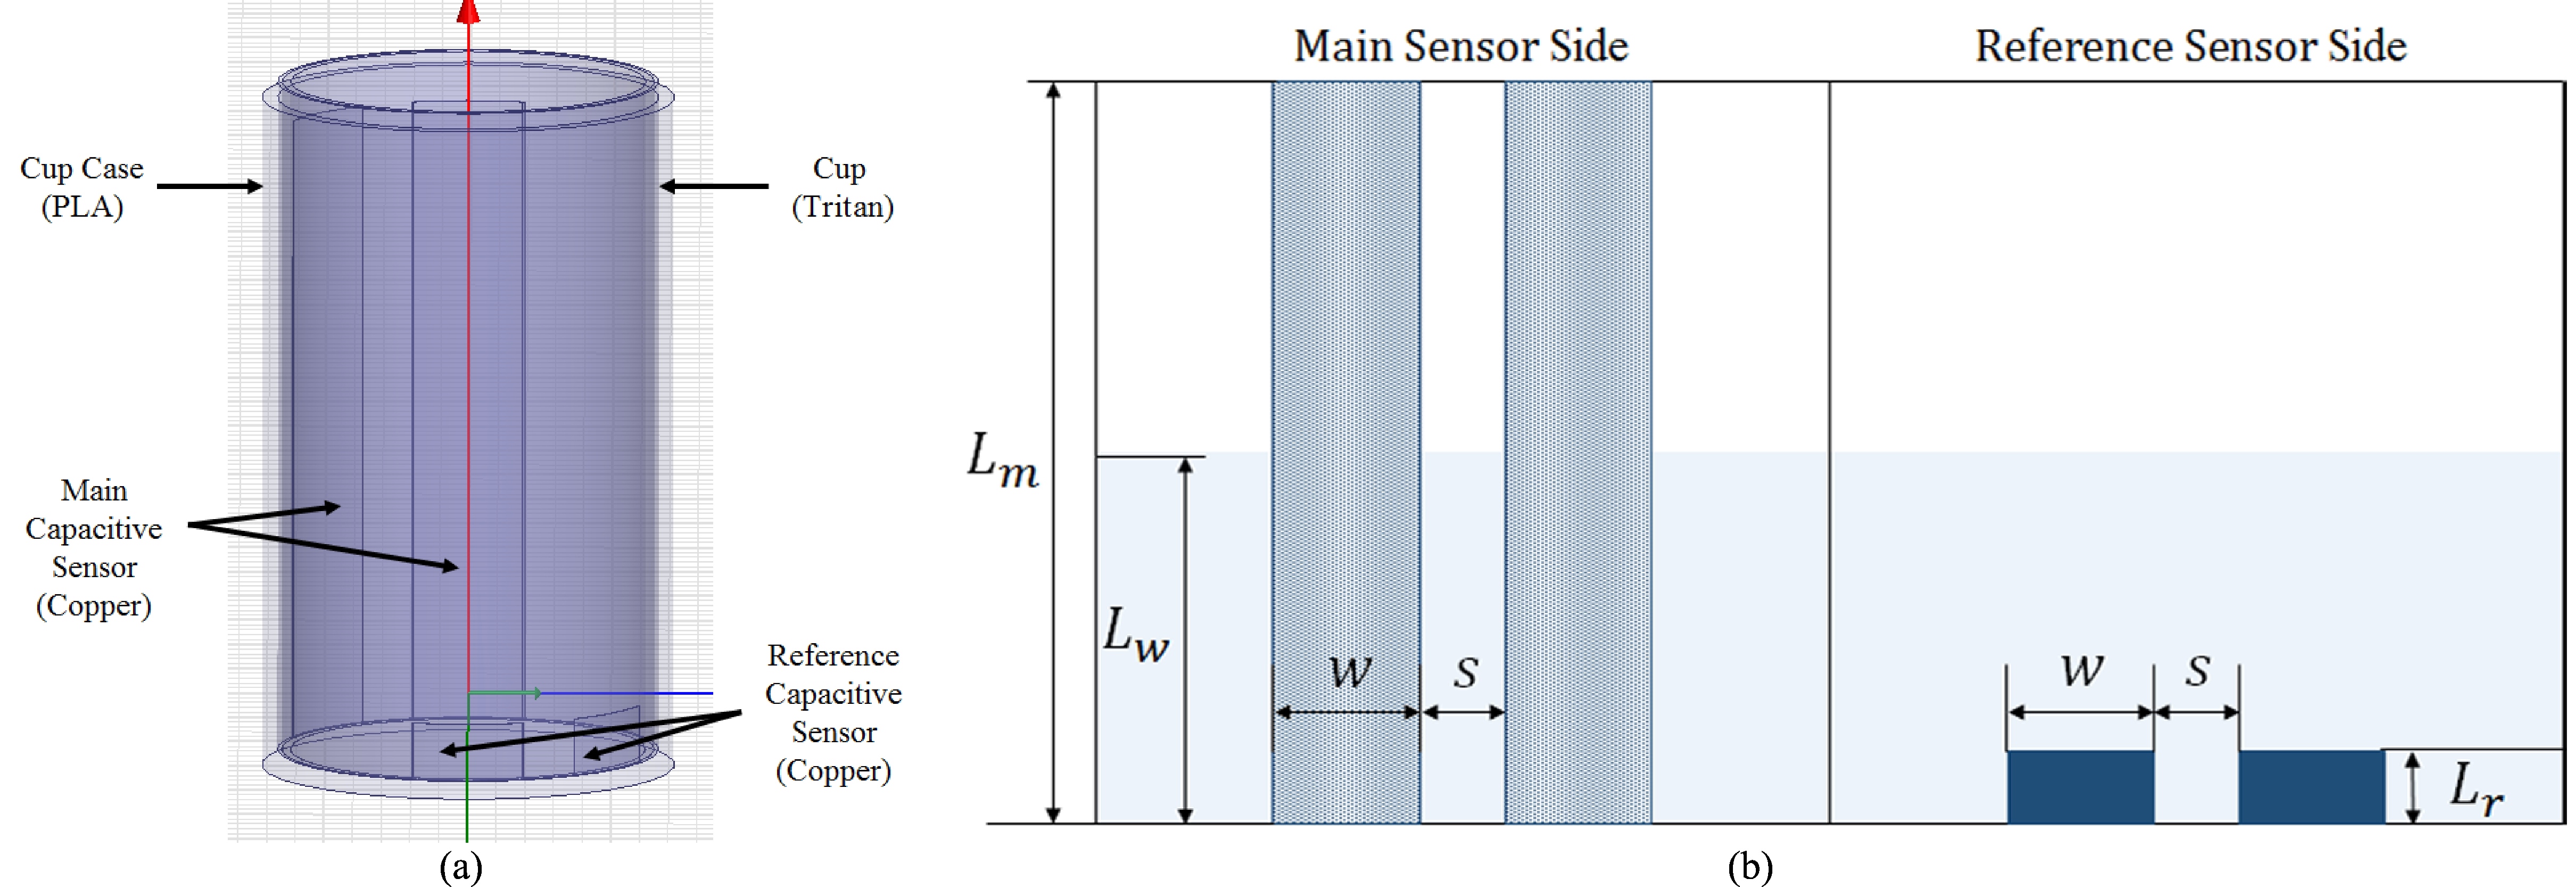 The proposed capacitive sensor with tumbler was subjected to FEA simulation. (a) 3D model of tumbler with capacitive sensor; (b) plan of designed capacitive sensor electrode dimensions.